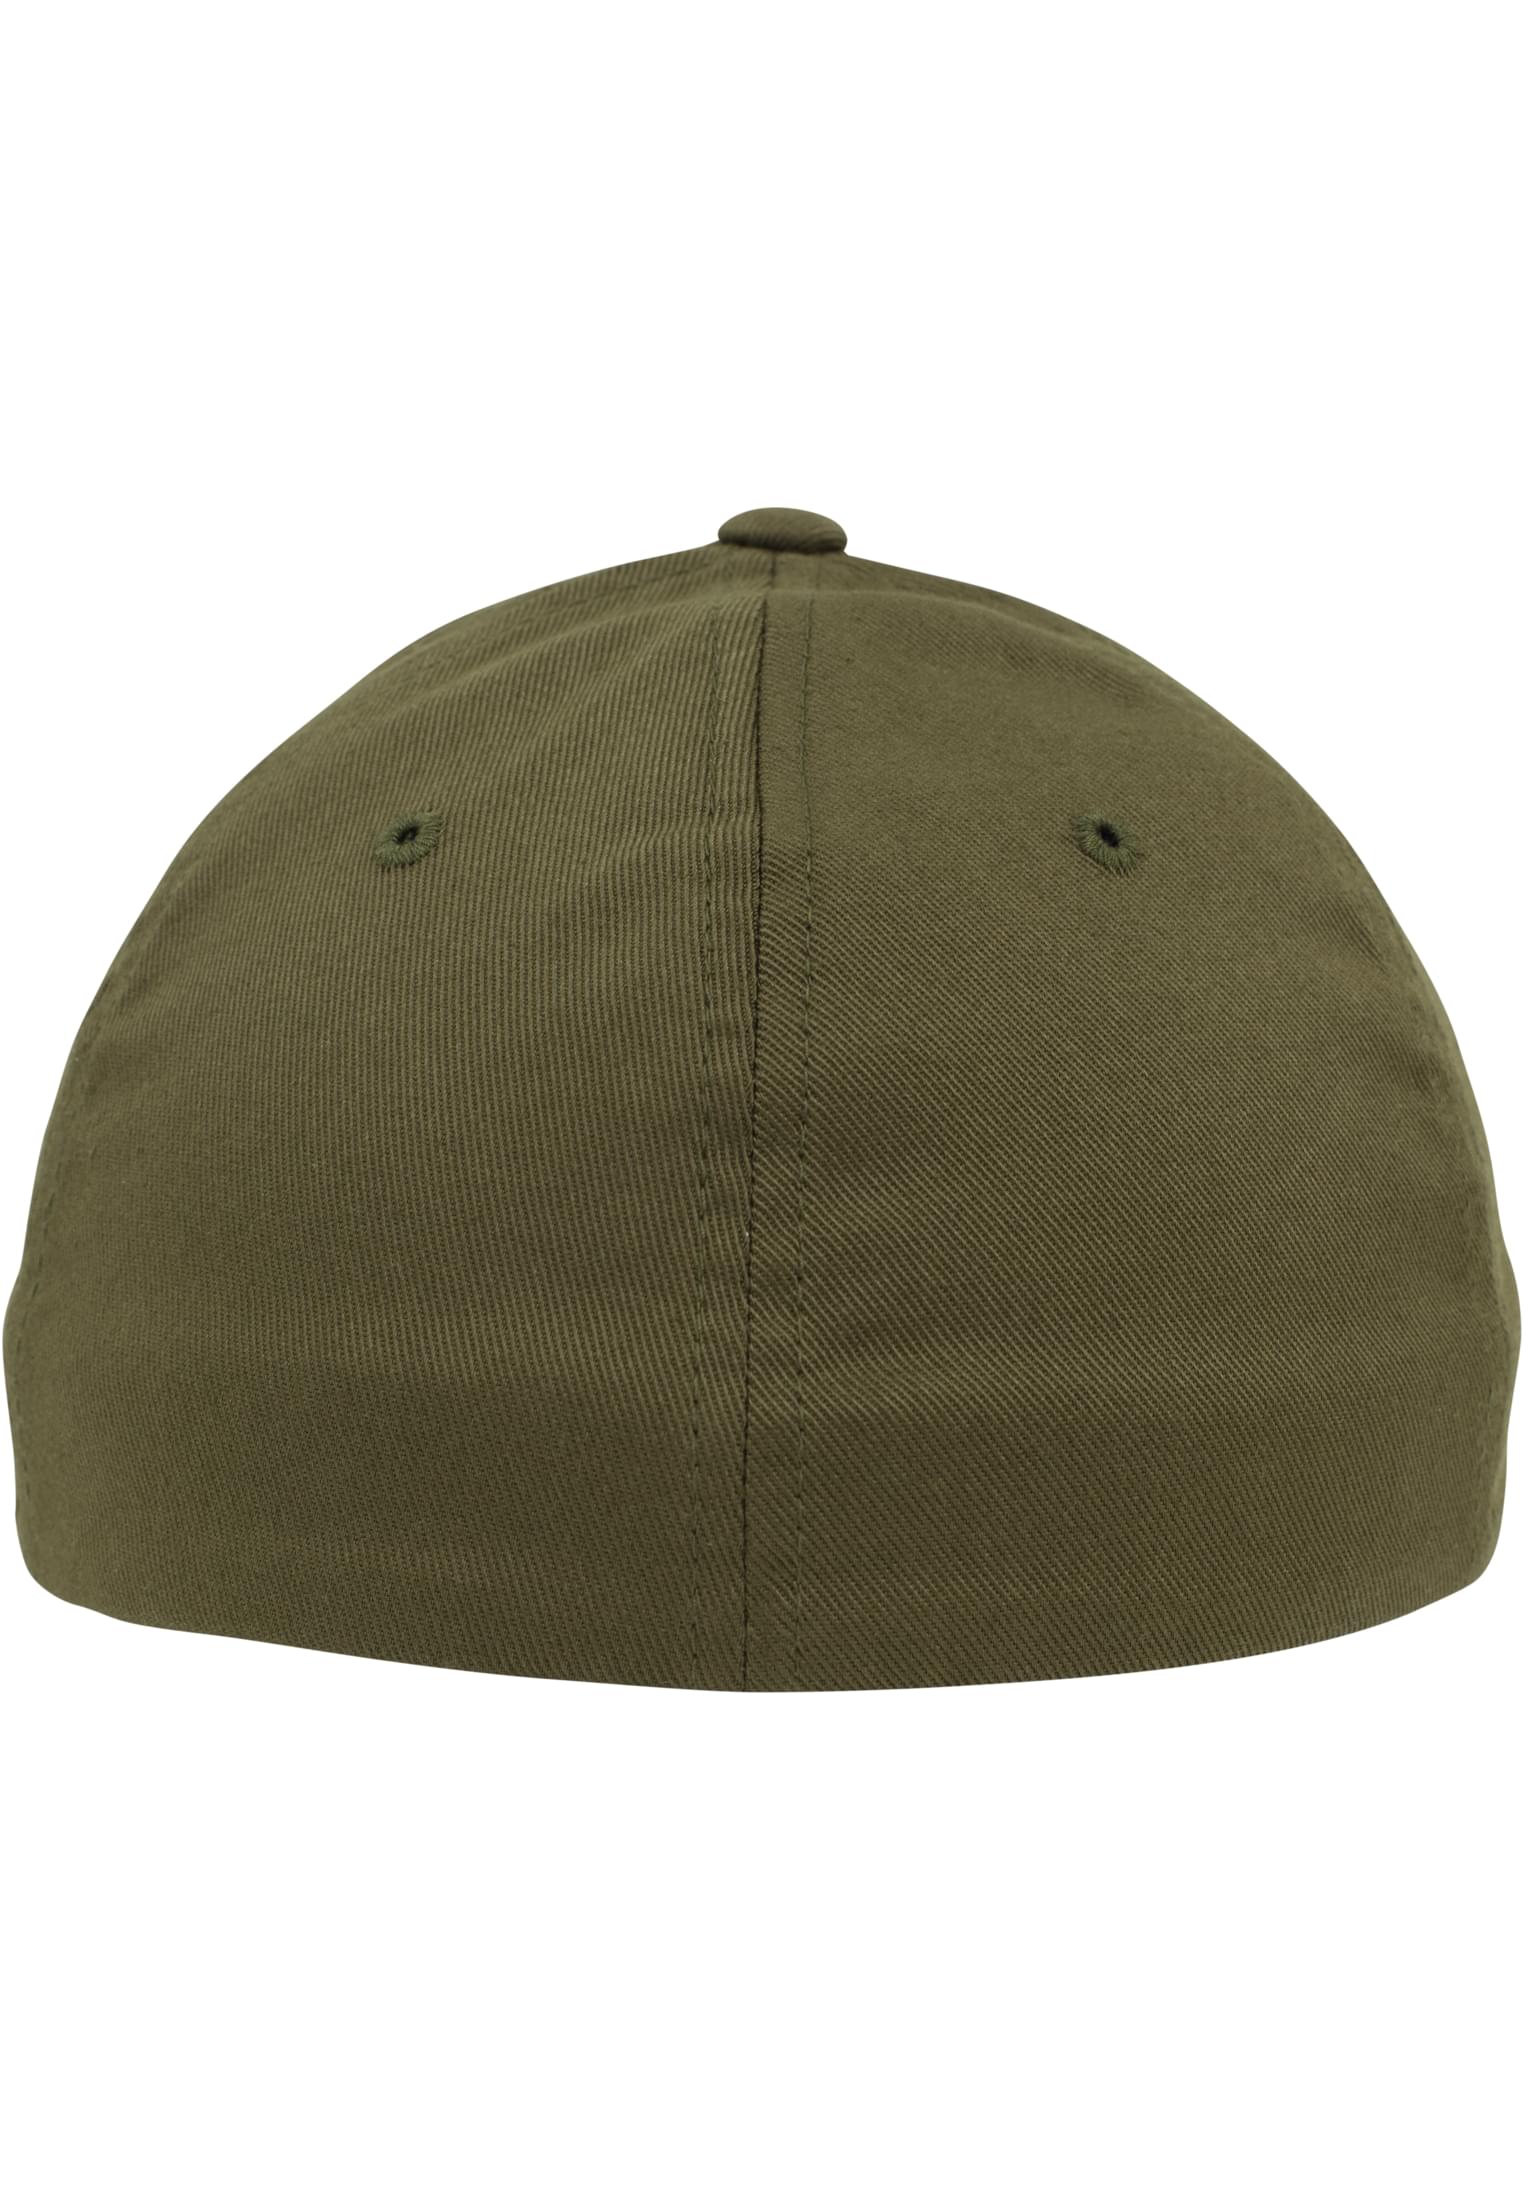  Fitted Baseball Cap in Farbe buck